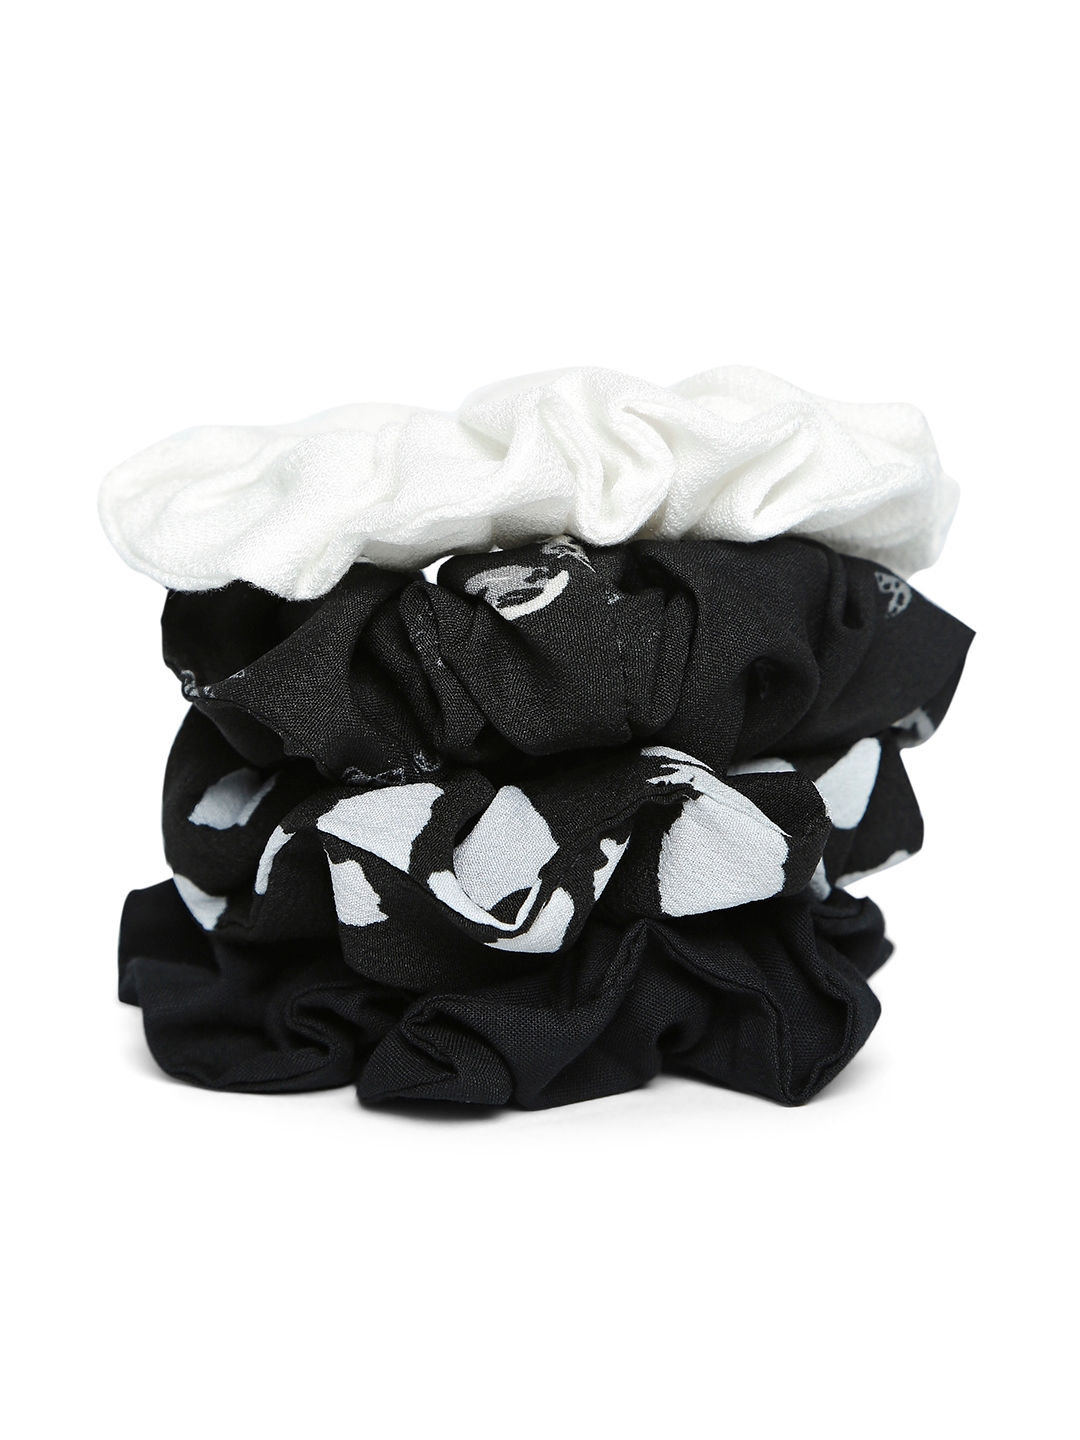 Lilly & Sparkle Black And White Scrunchies Set Of 4